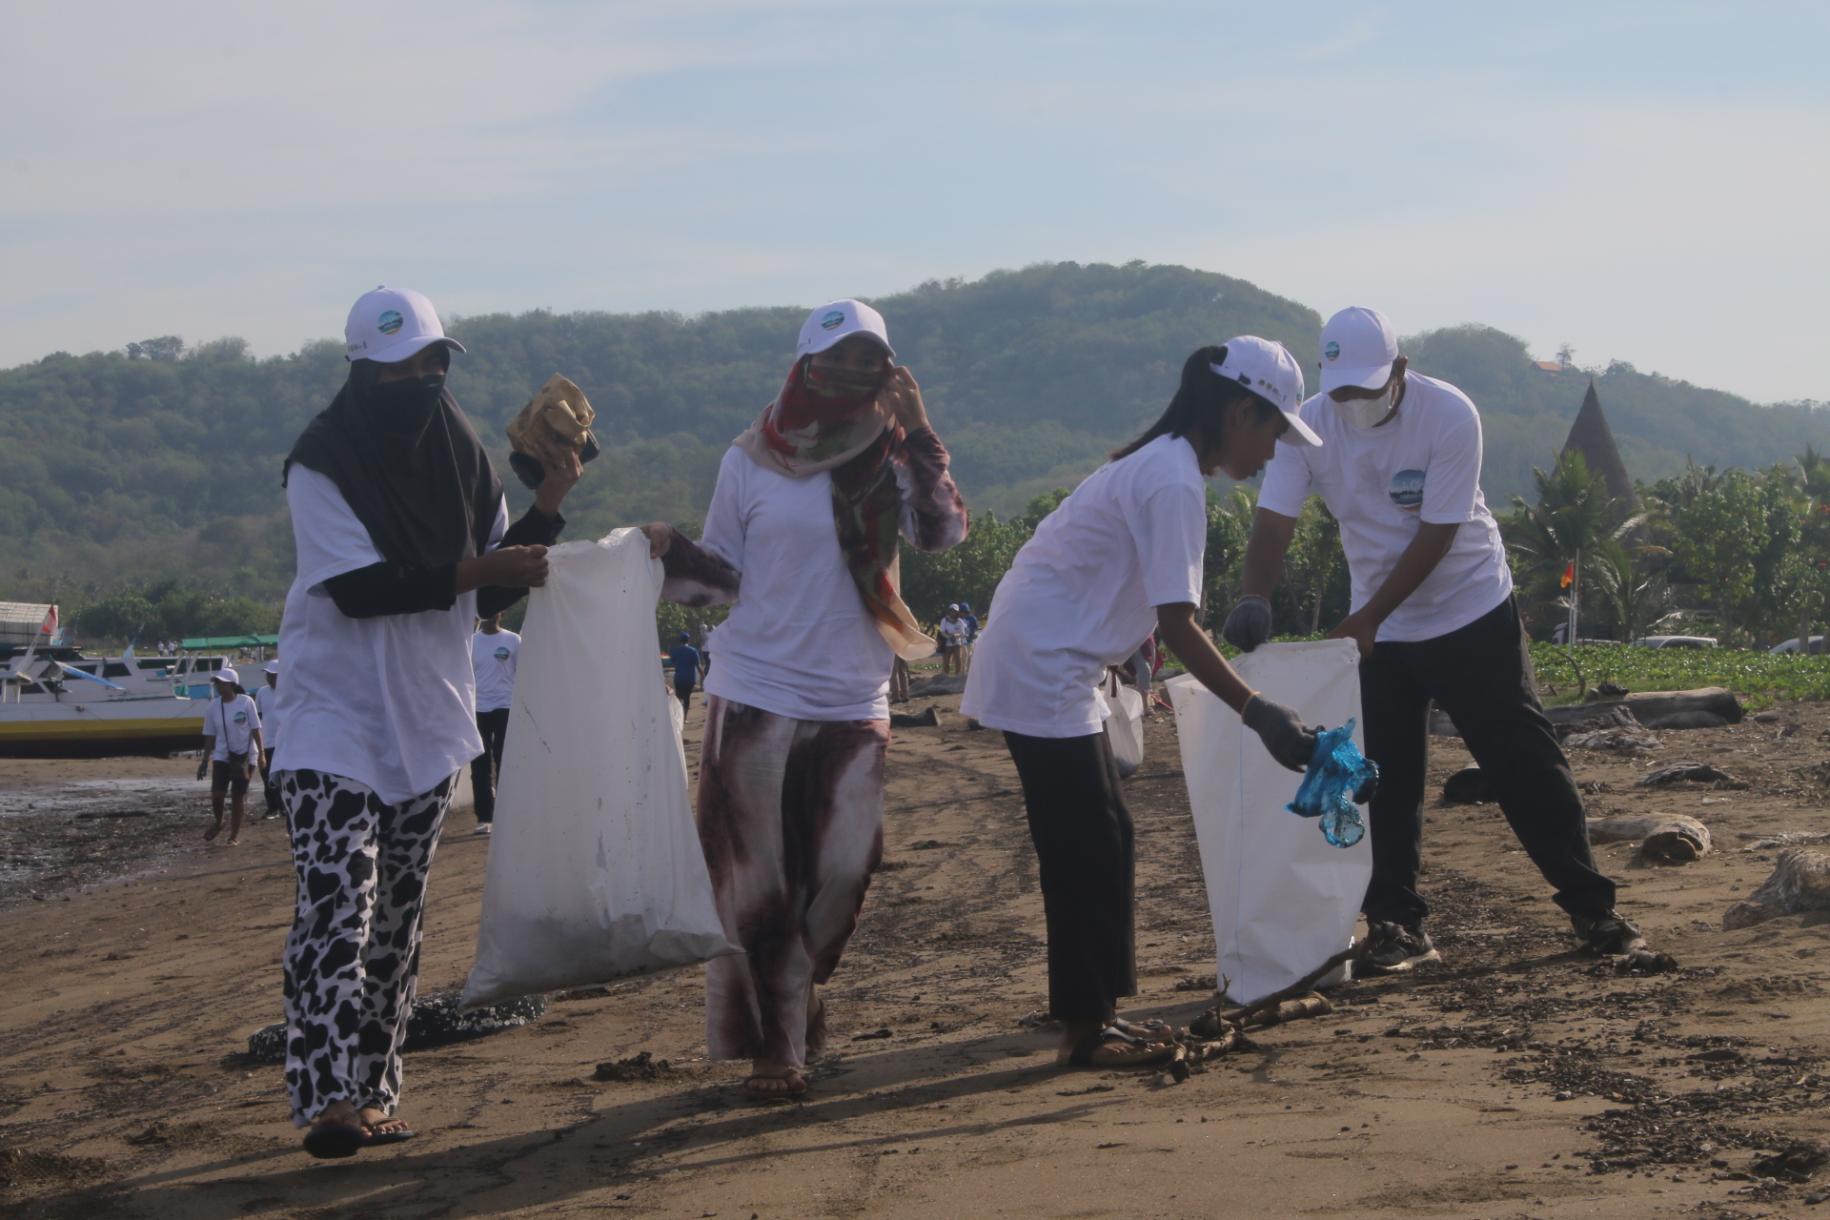 Four people in white shirts and hats clean up a beach with giant white bags of trash